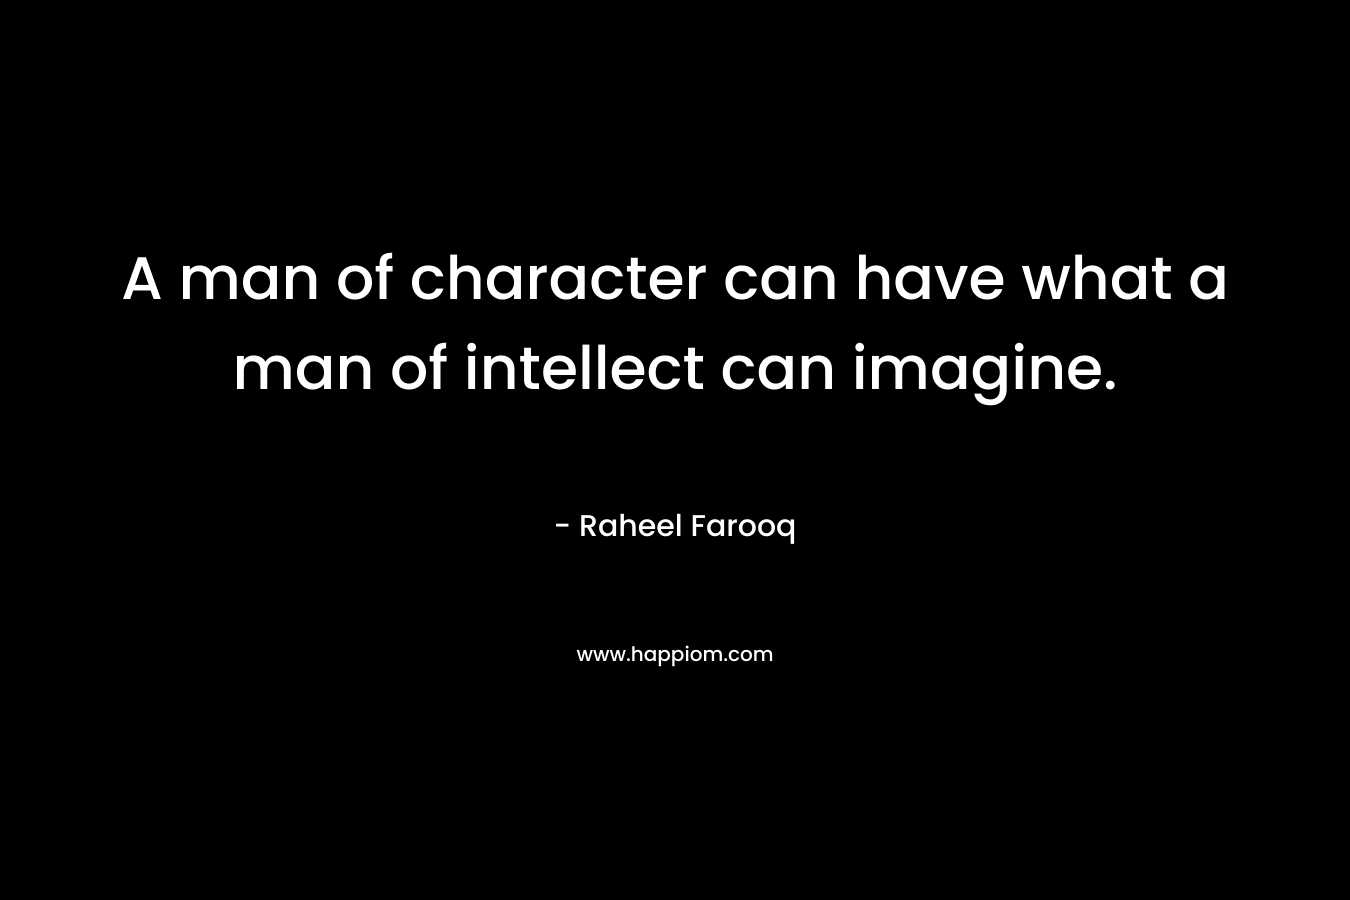 A man of character can have what a man of intellect can imagine.